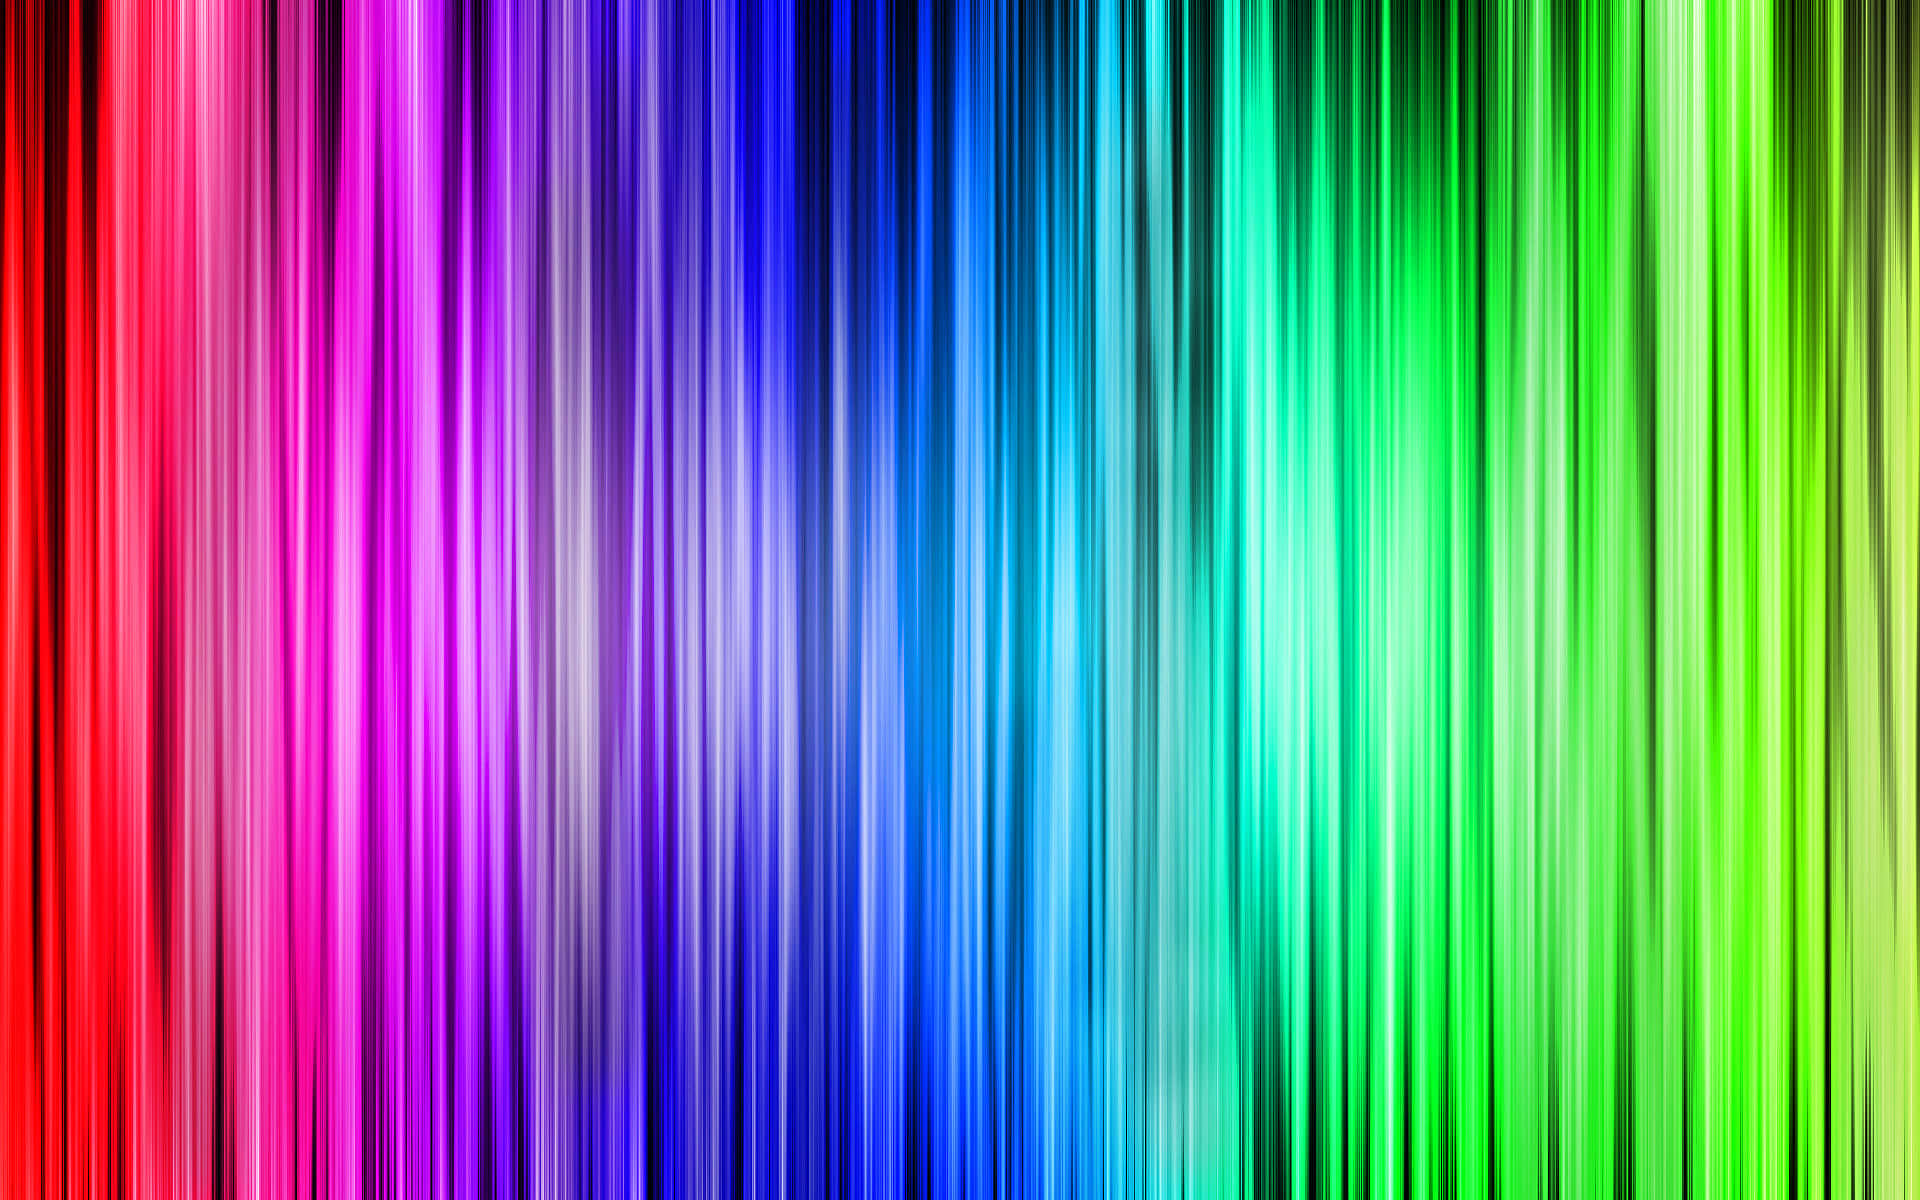 a colorful background with a rainbow of colors